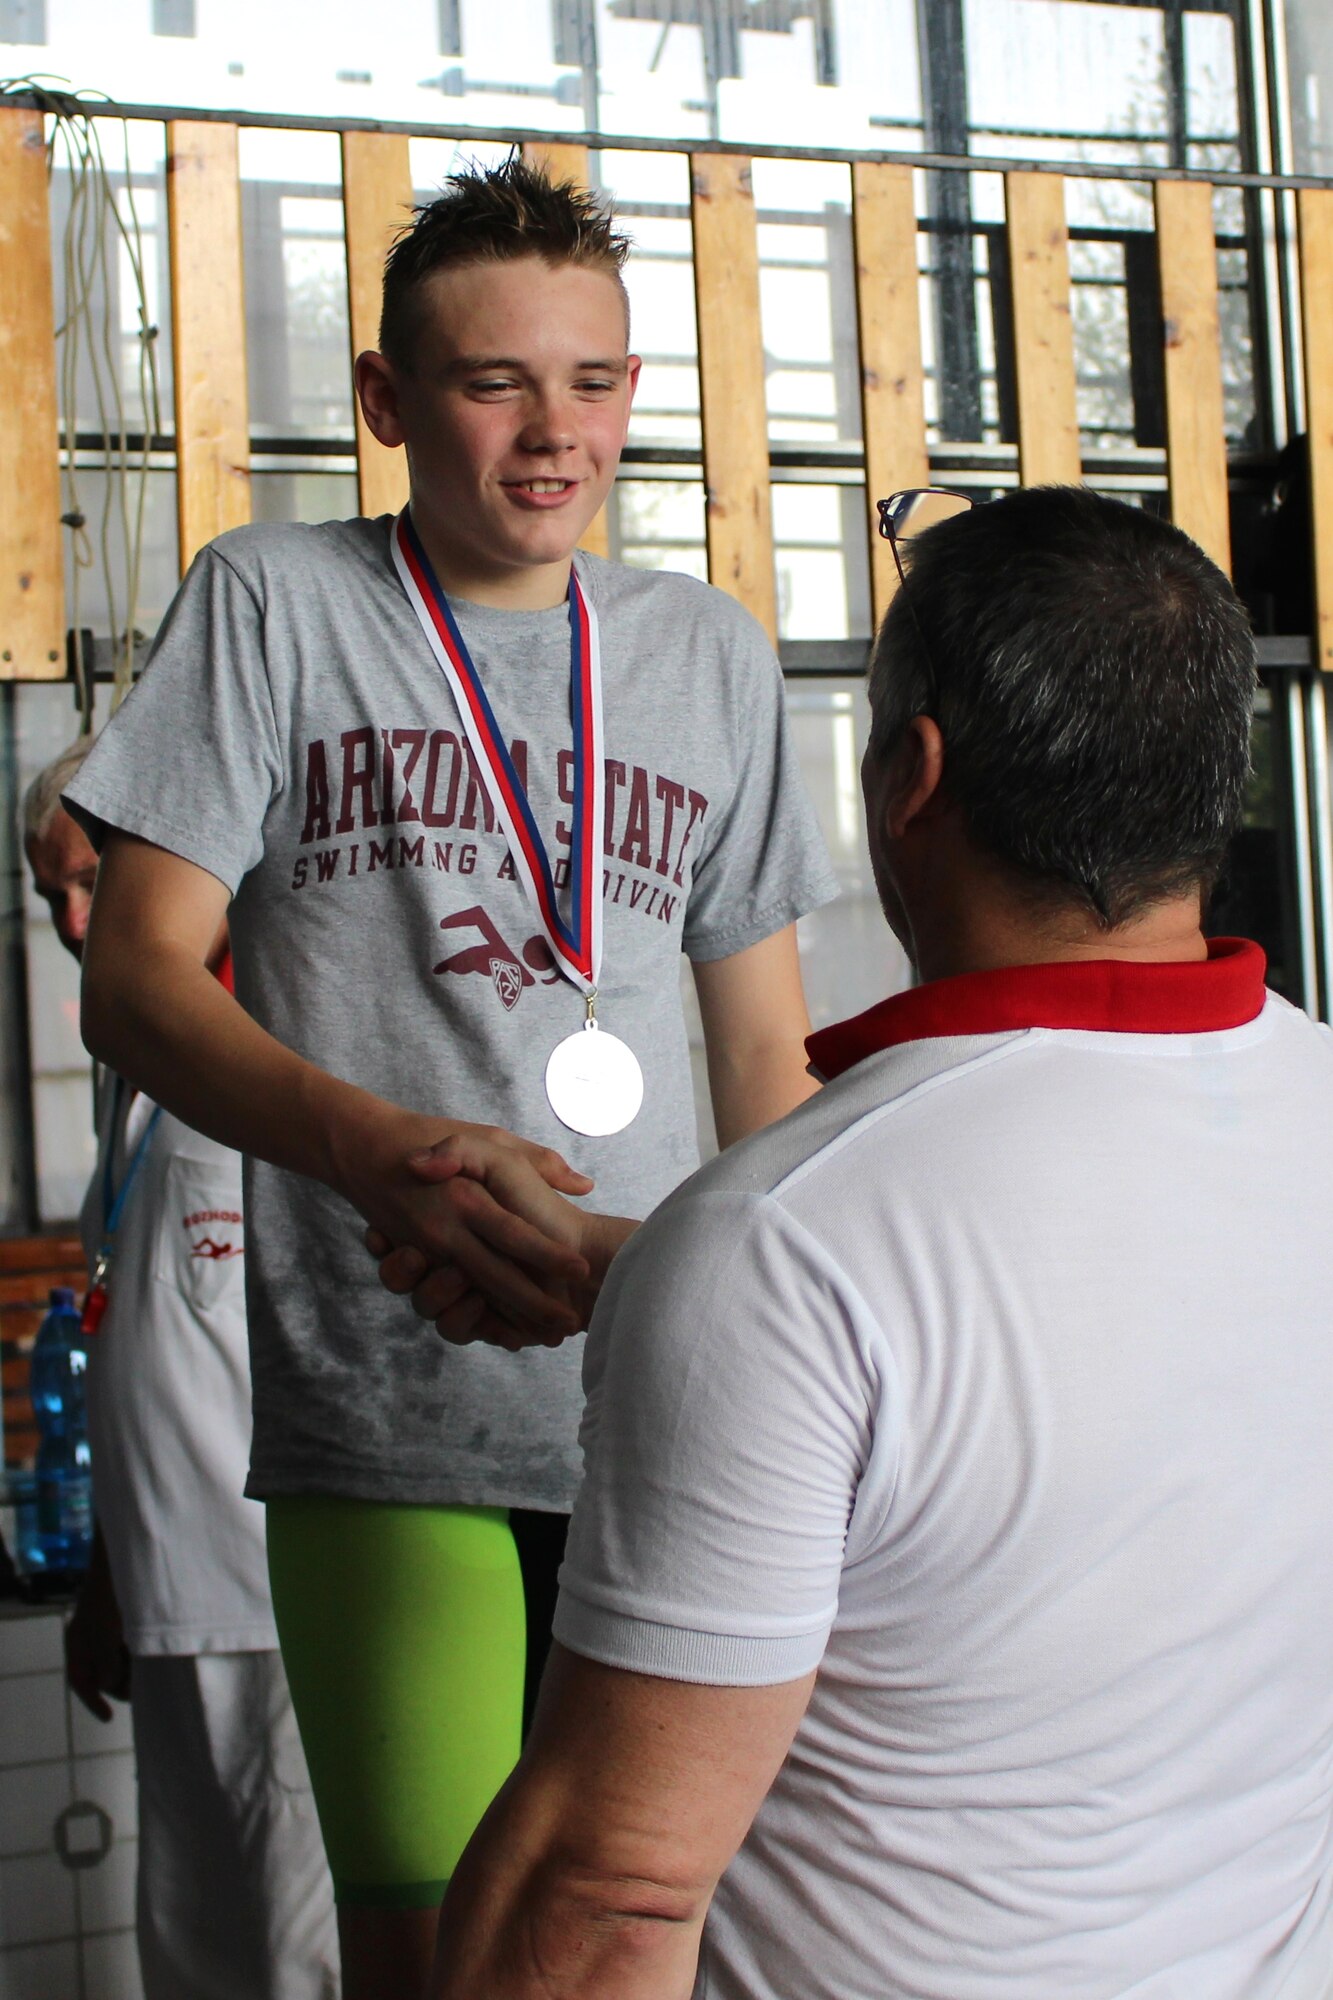 Andrew Hendrickson receives congratulations after winning two gold and two silver medals at the Czech National Swim Competition in Brno, Czech Republic, June 25, 2016. Hendrickson’s medals are payoff for a lot of hard work and dedication from swimming almost 400 miles in the Ramstein pool last year, and the result of a strong support system. (Courtesy photo)